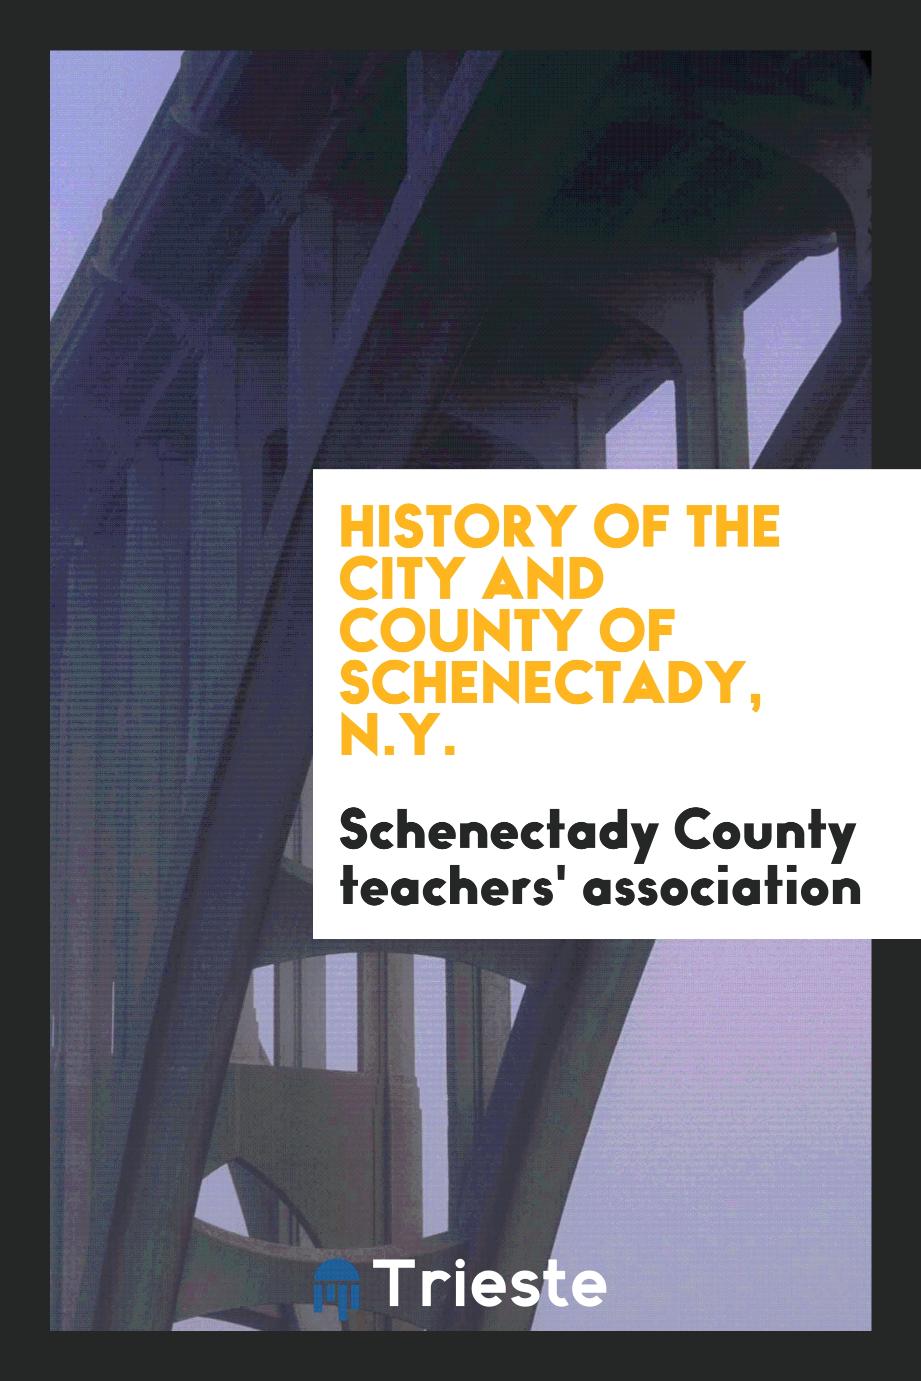 Schenectady County teachers' association - History of the city and county of Schenectady, N.Y.